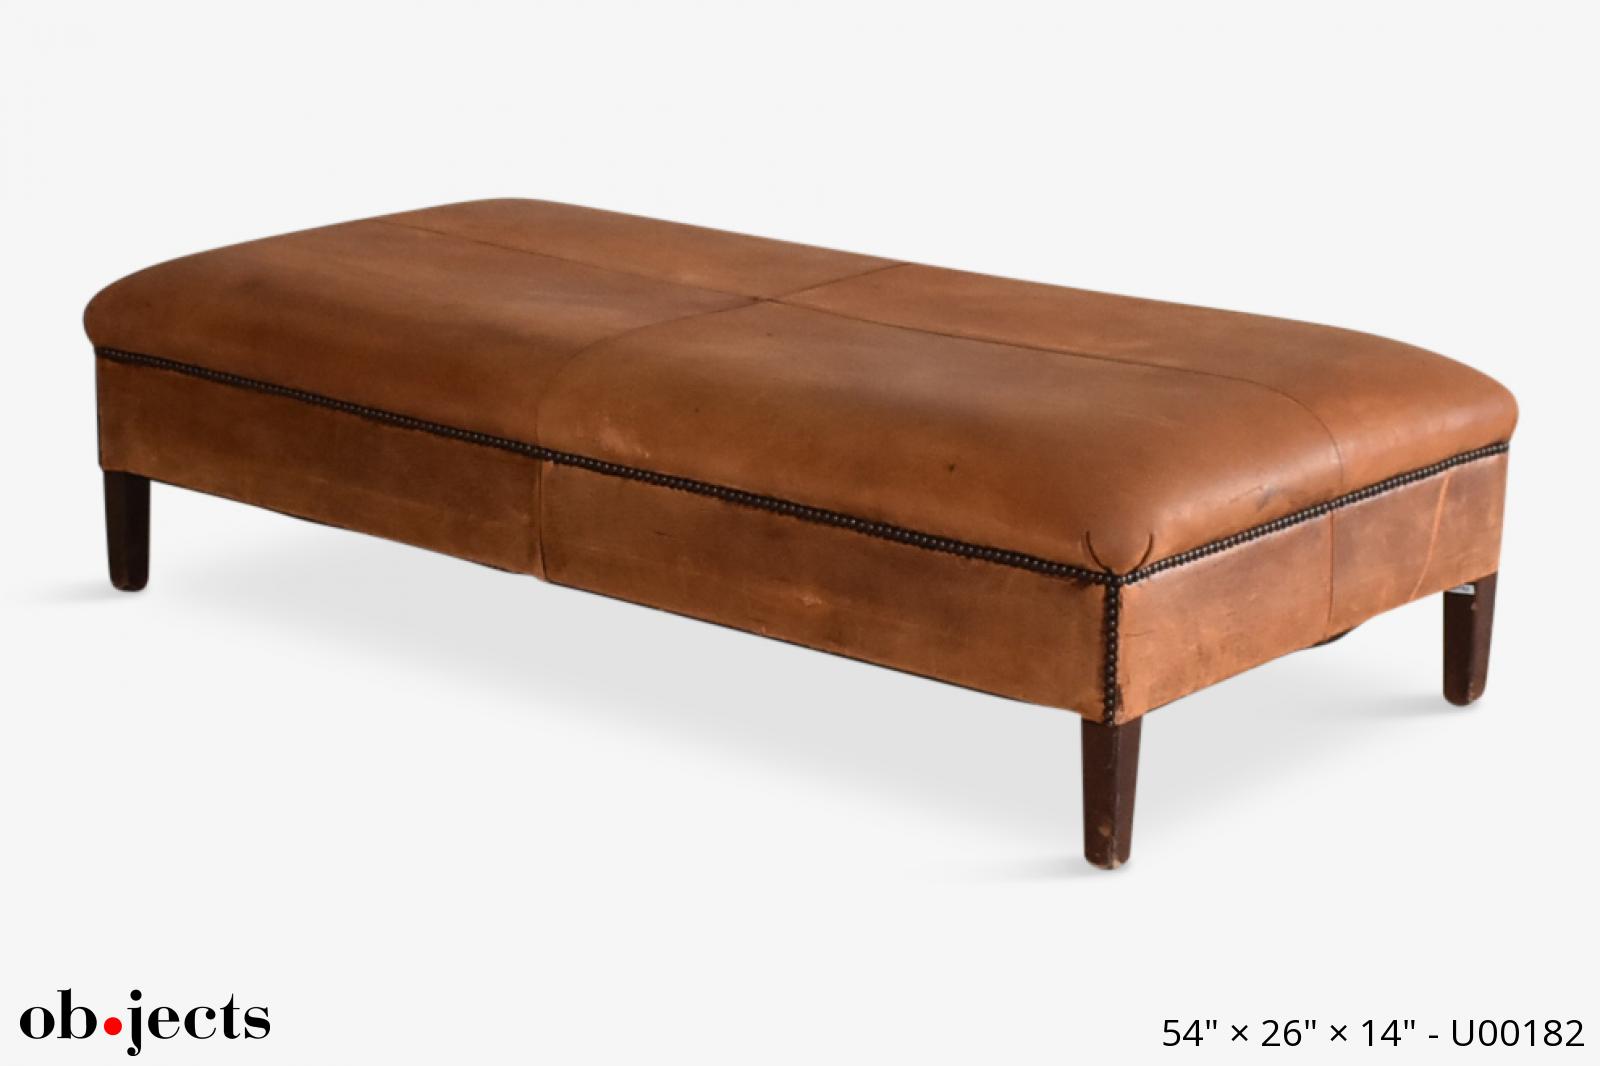 Ottoman Bench Tan Leather Ob Jects, Tan Leather Bench